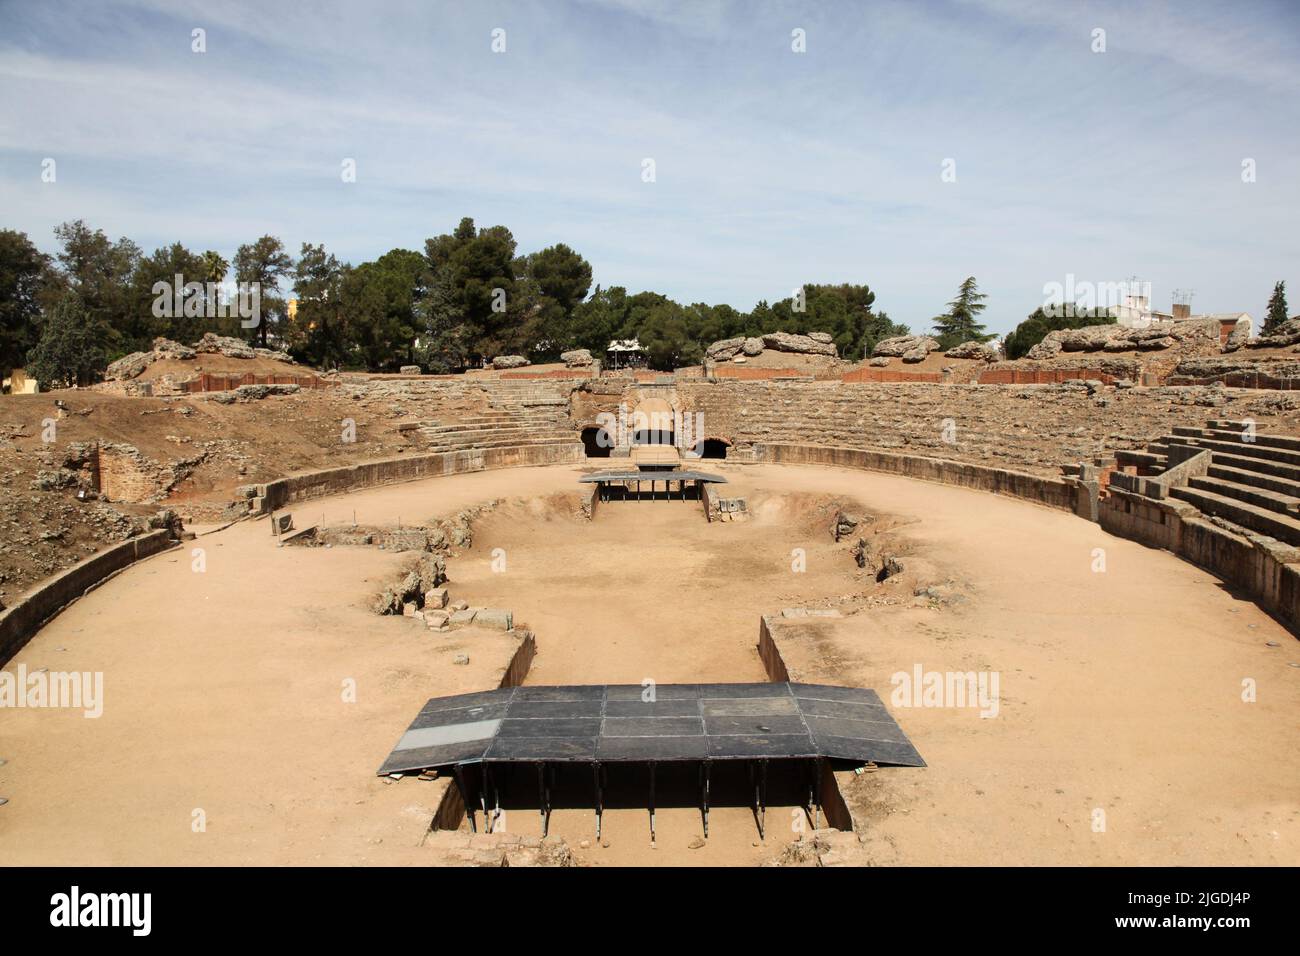 The 'Antifeatro' in Merida Spain was opened in 8 BC for gladiatorial battles and was built to house up to 14,000 spectators. Stock Photo